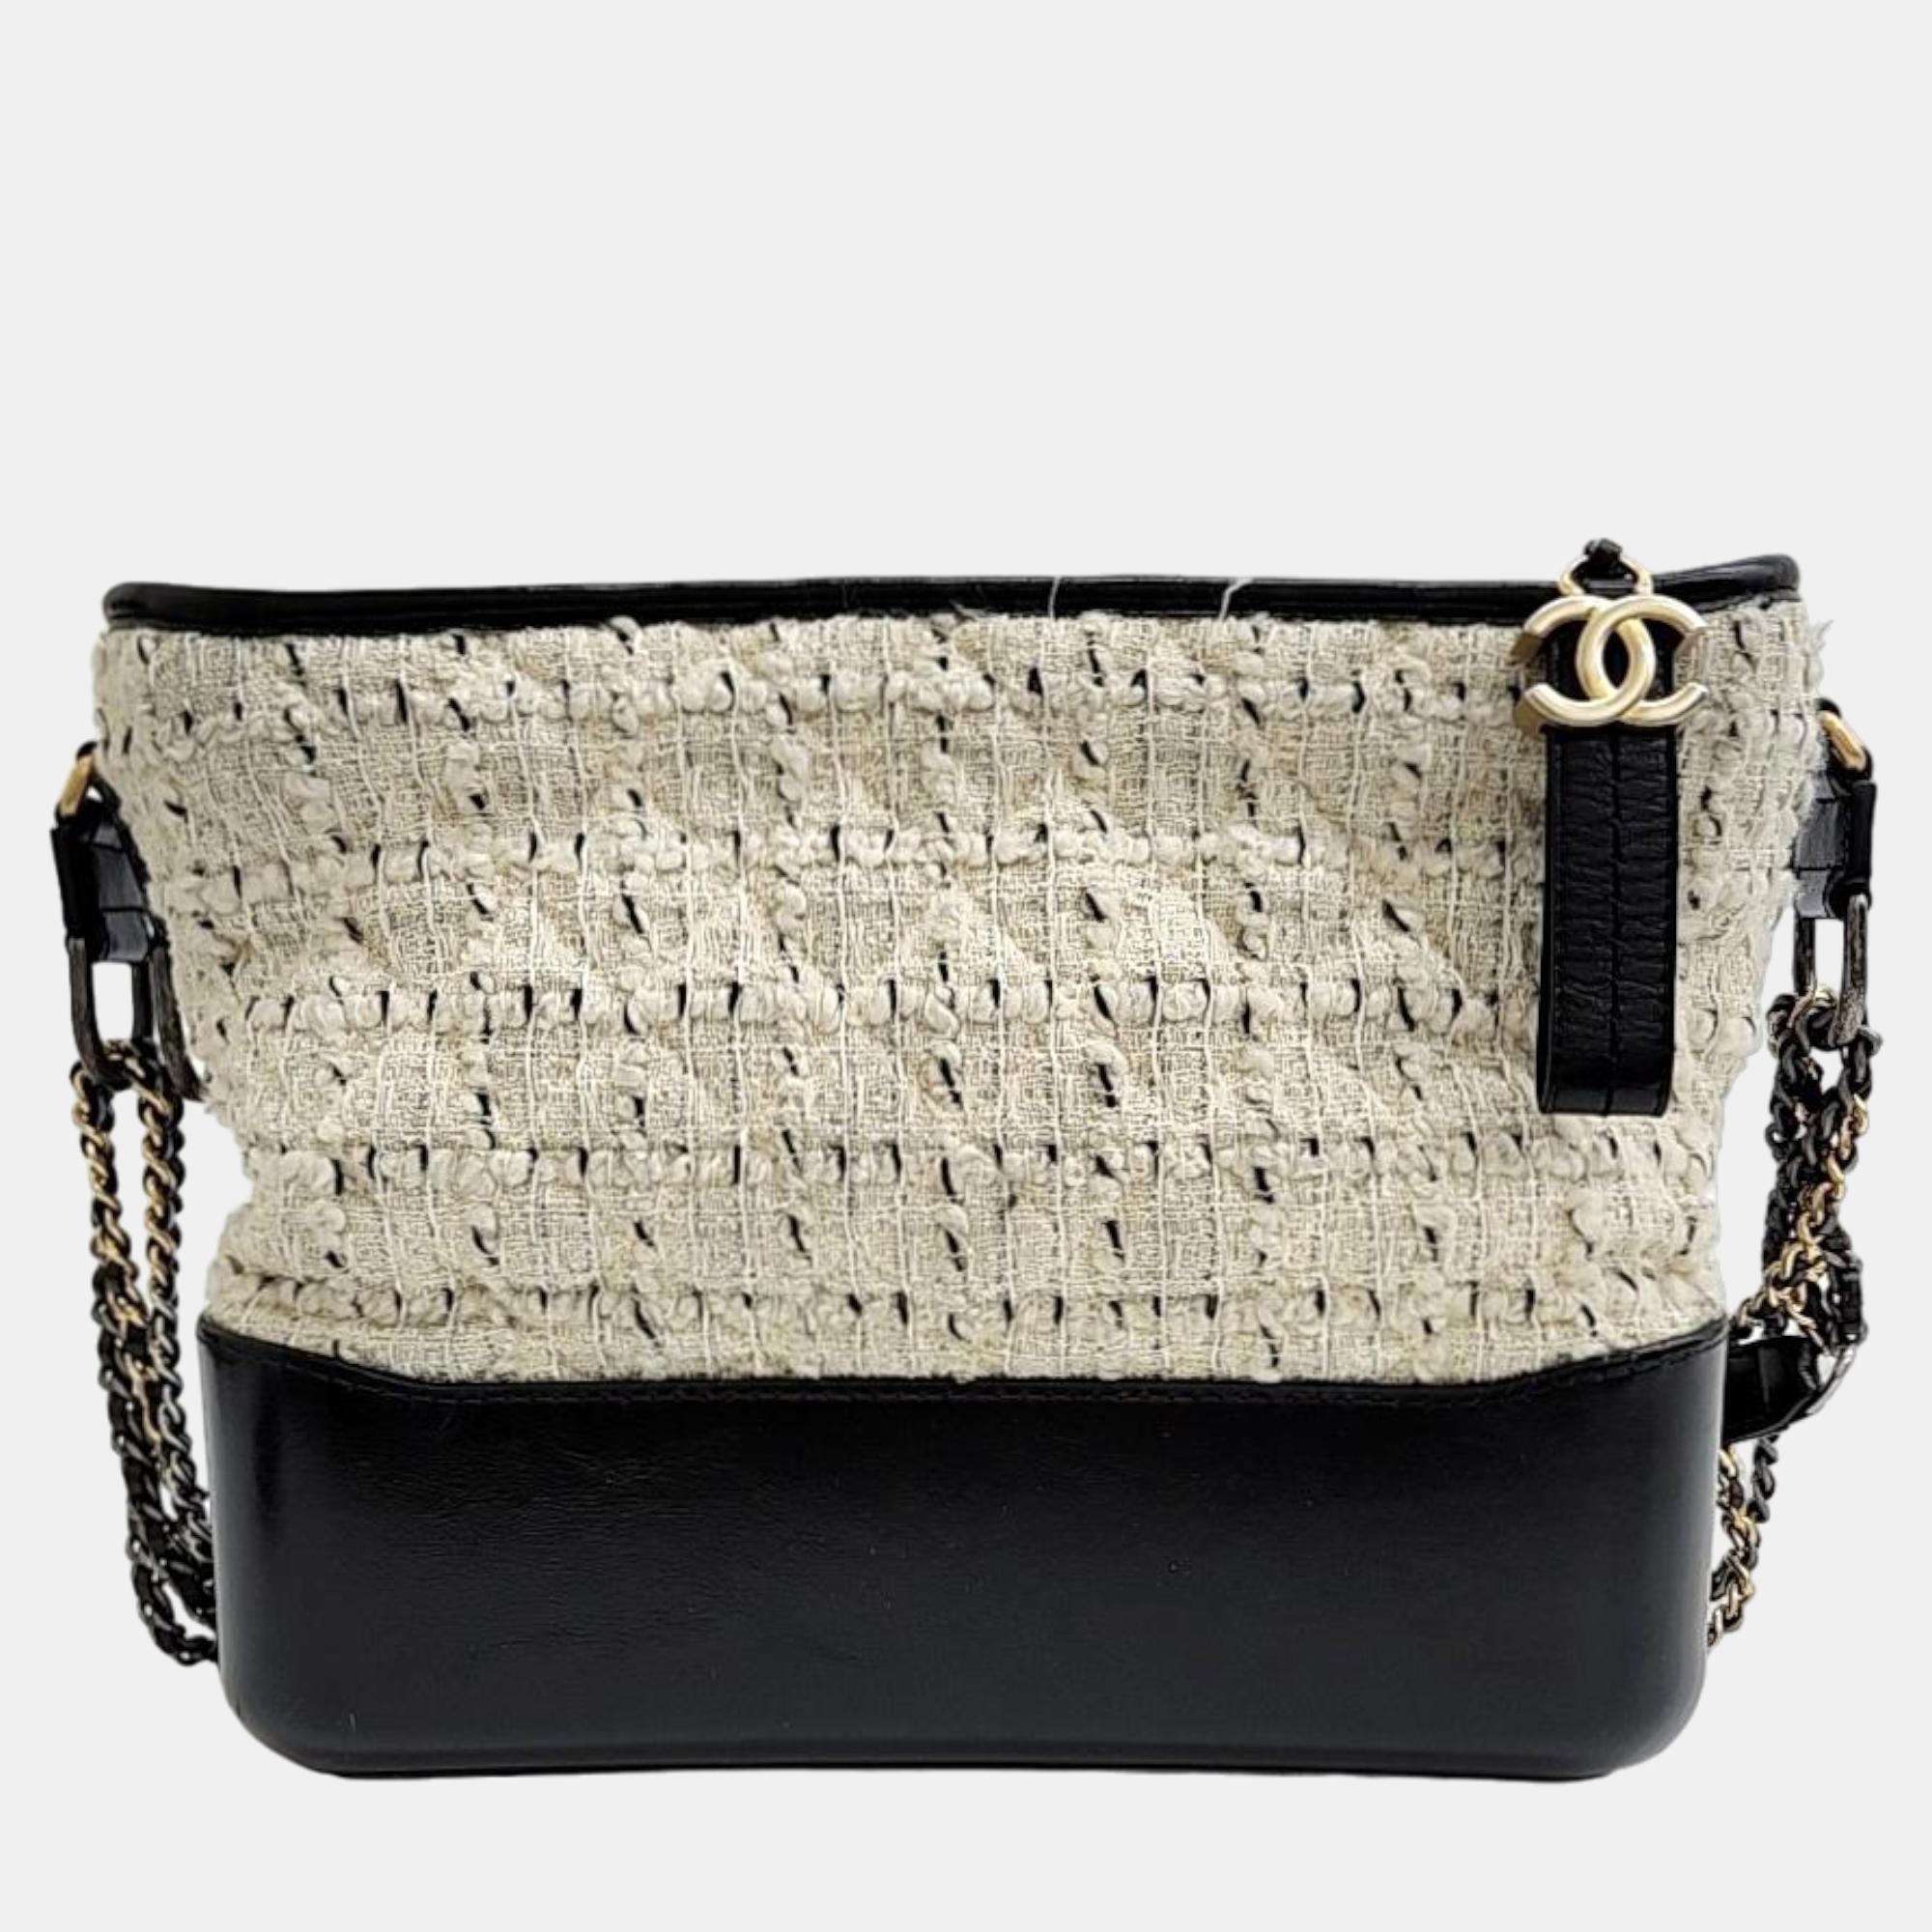 Chanel white/black tweed leather small gabrielle shoulder bag